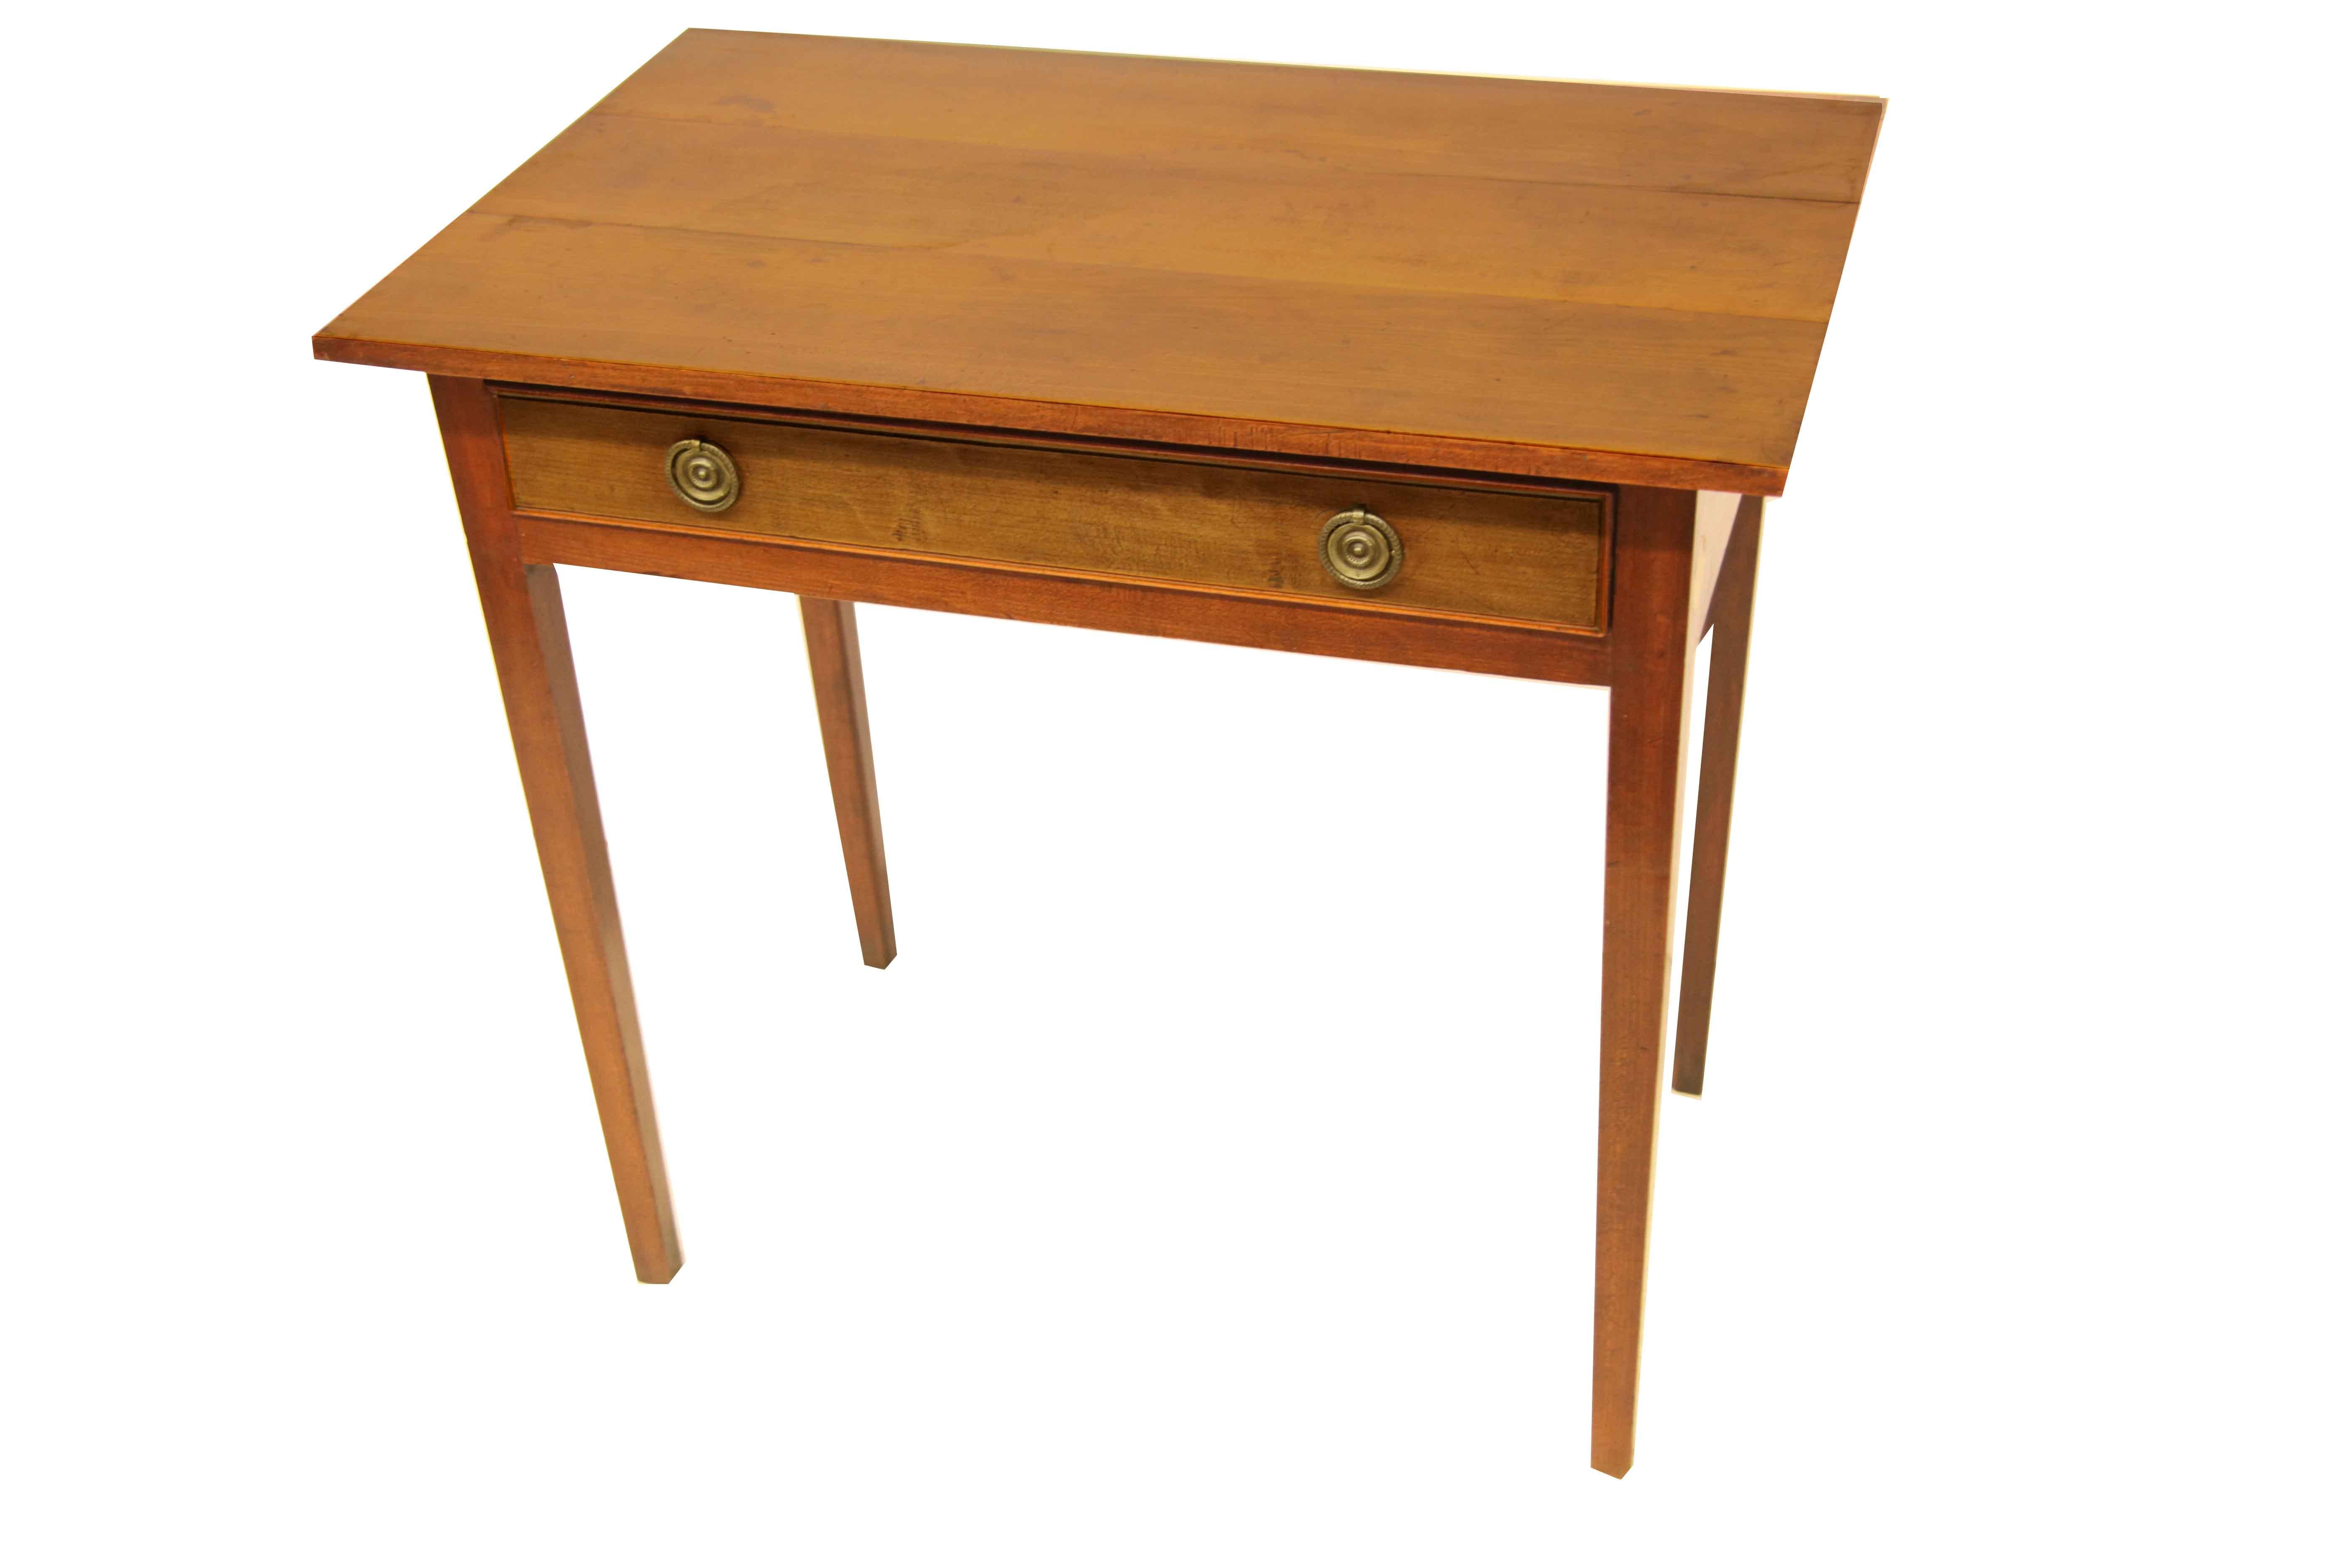 English Cherry One Drawer Table In Good Condition For Sale In Wilson, NC